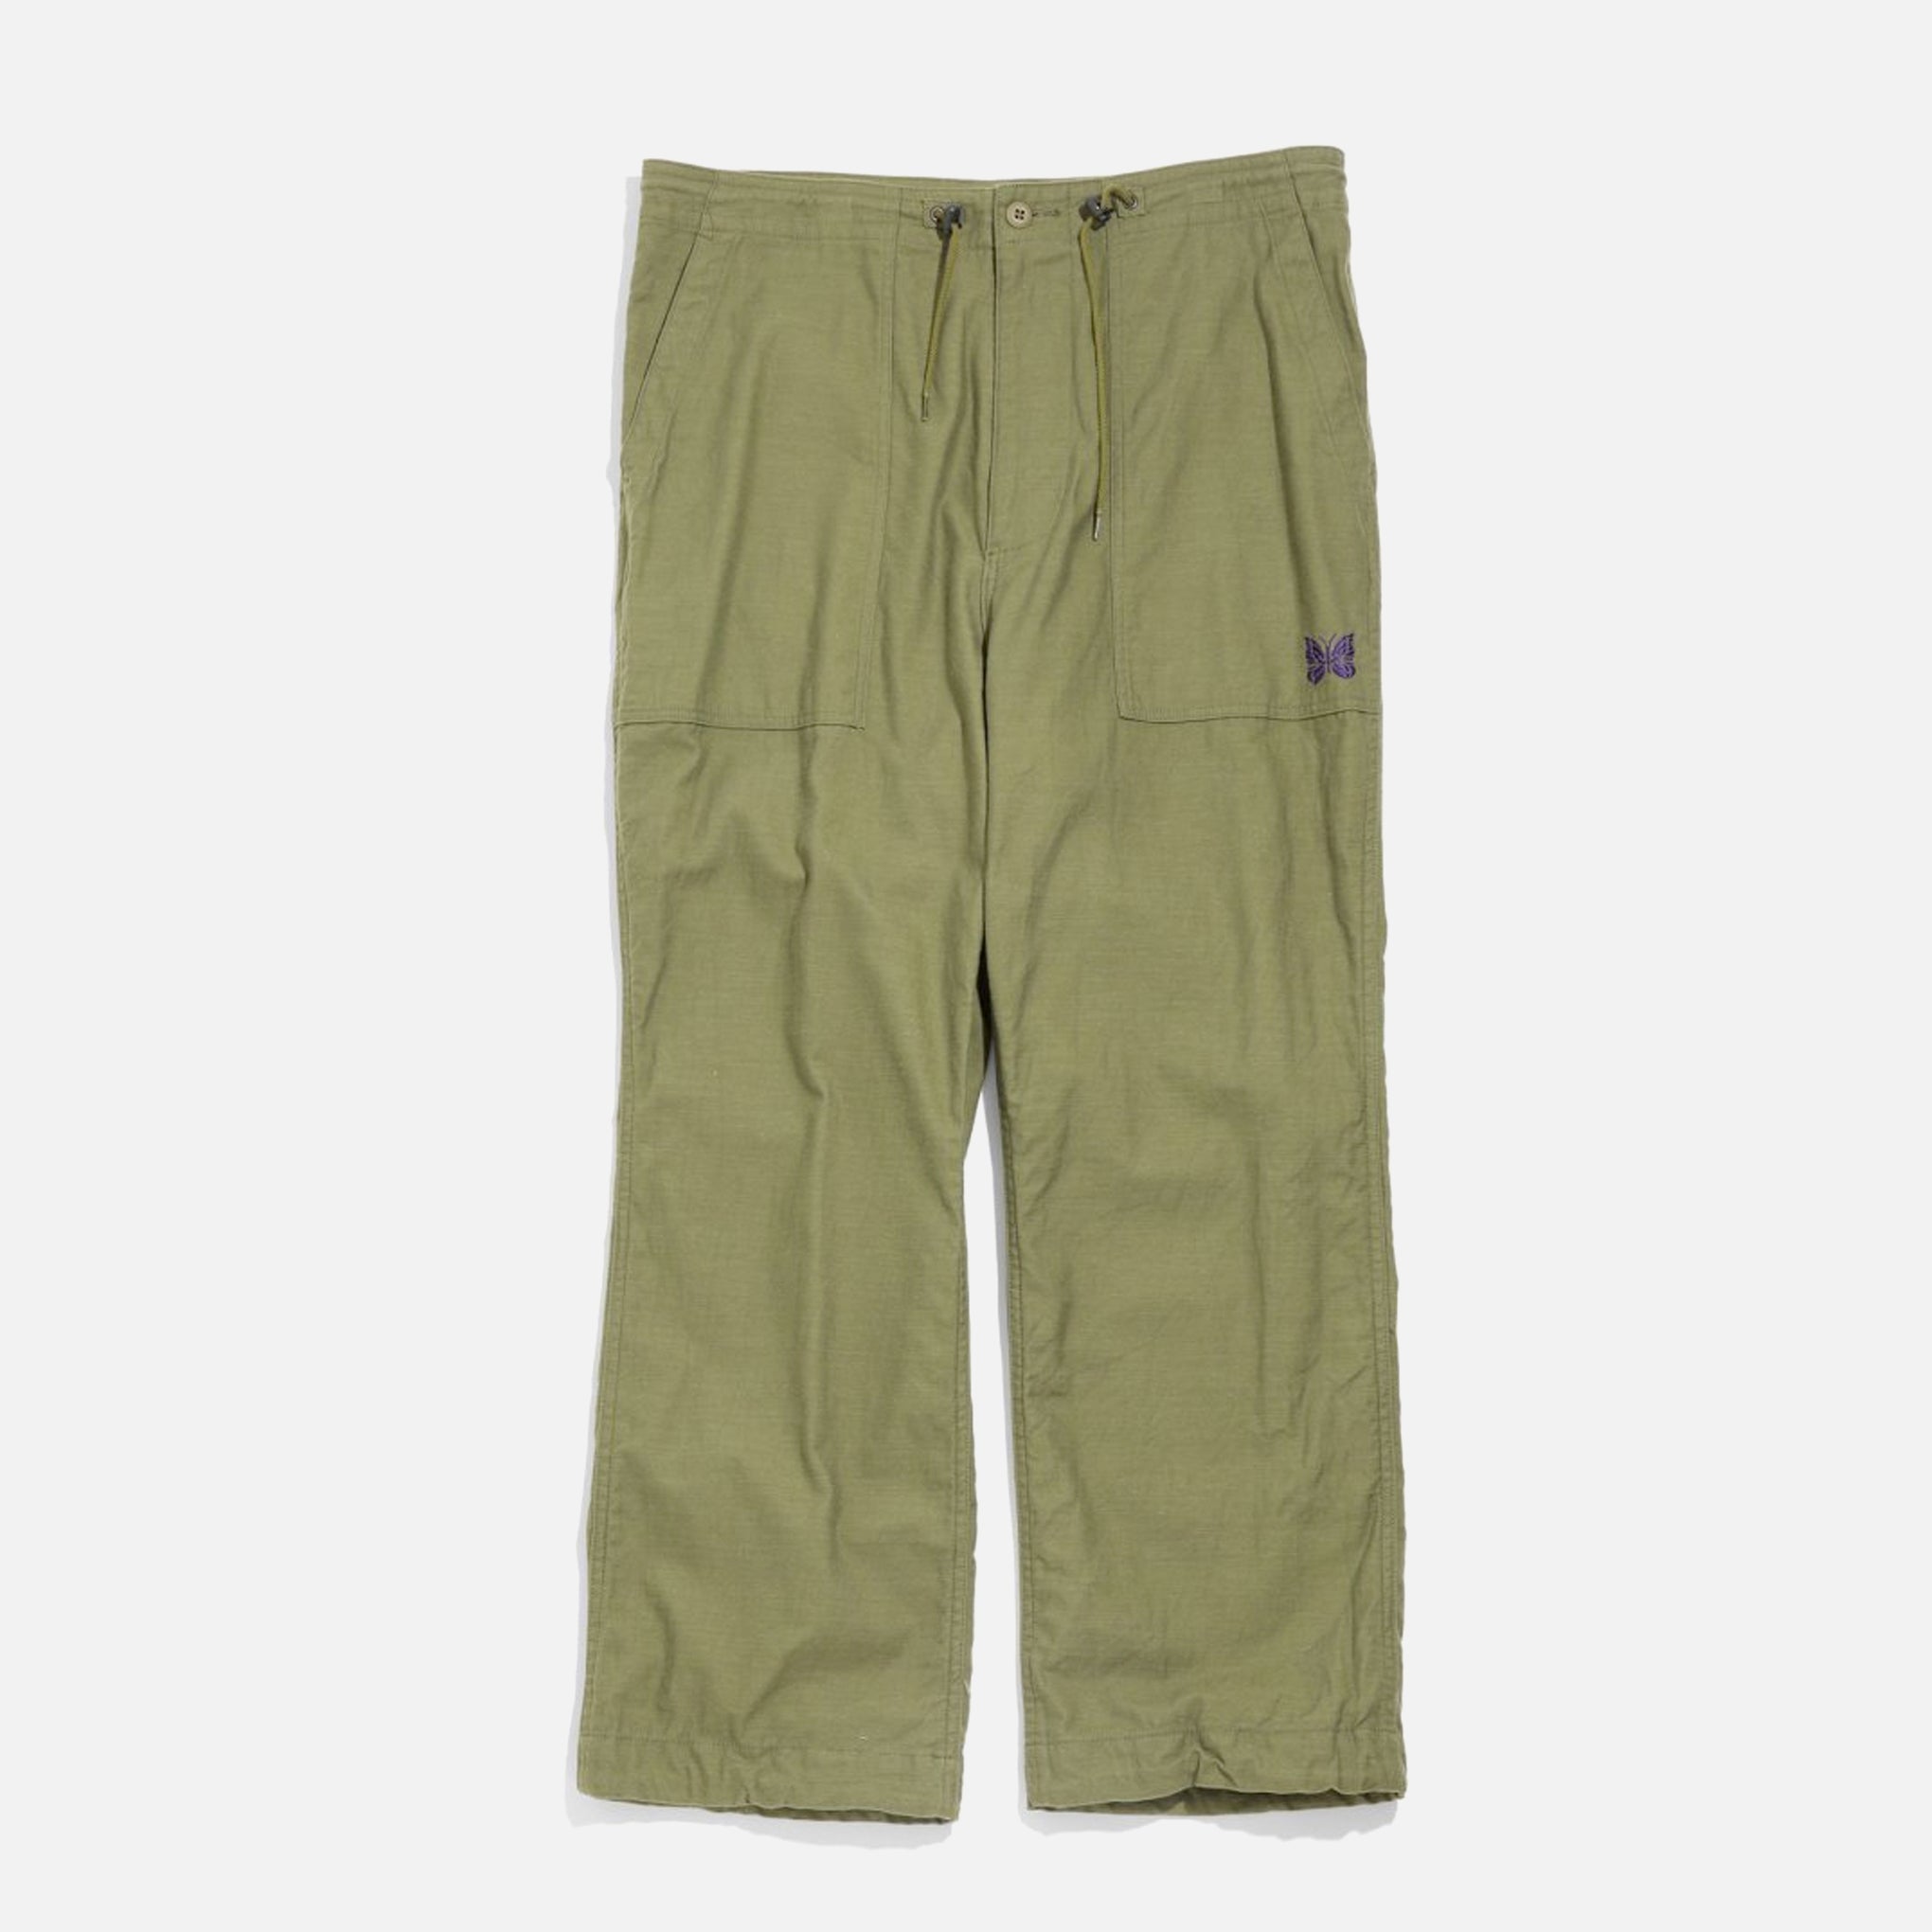 Needles String Fatigue Pant - Olive Back Sateen